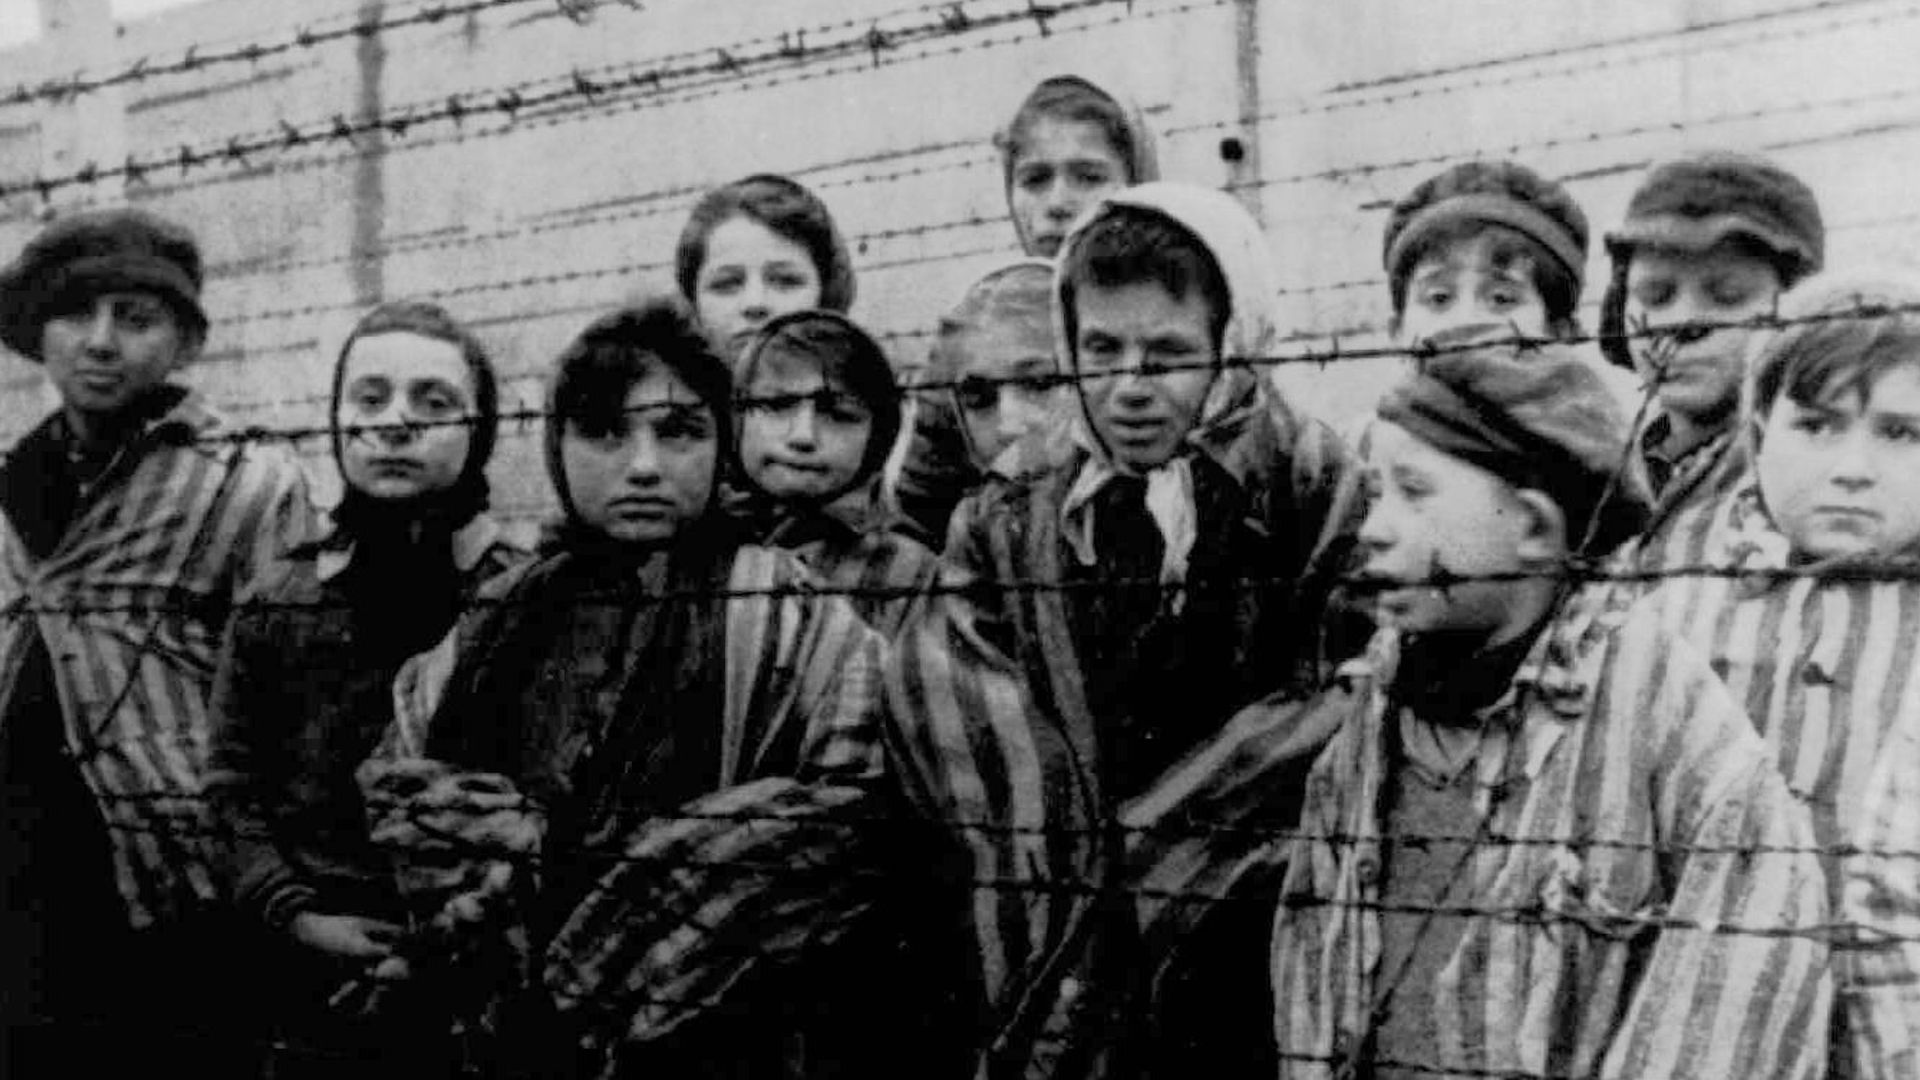 Pupils learn about the horrors of the Holocaust by 'talking' to survivors using AI and virtual reality